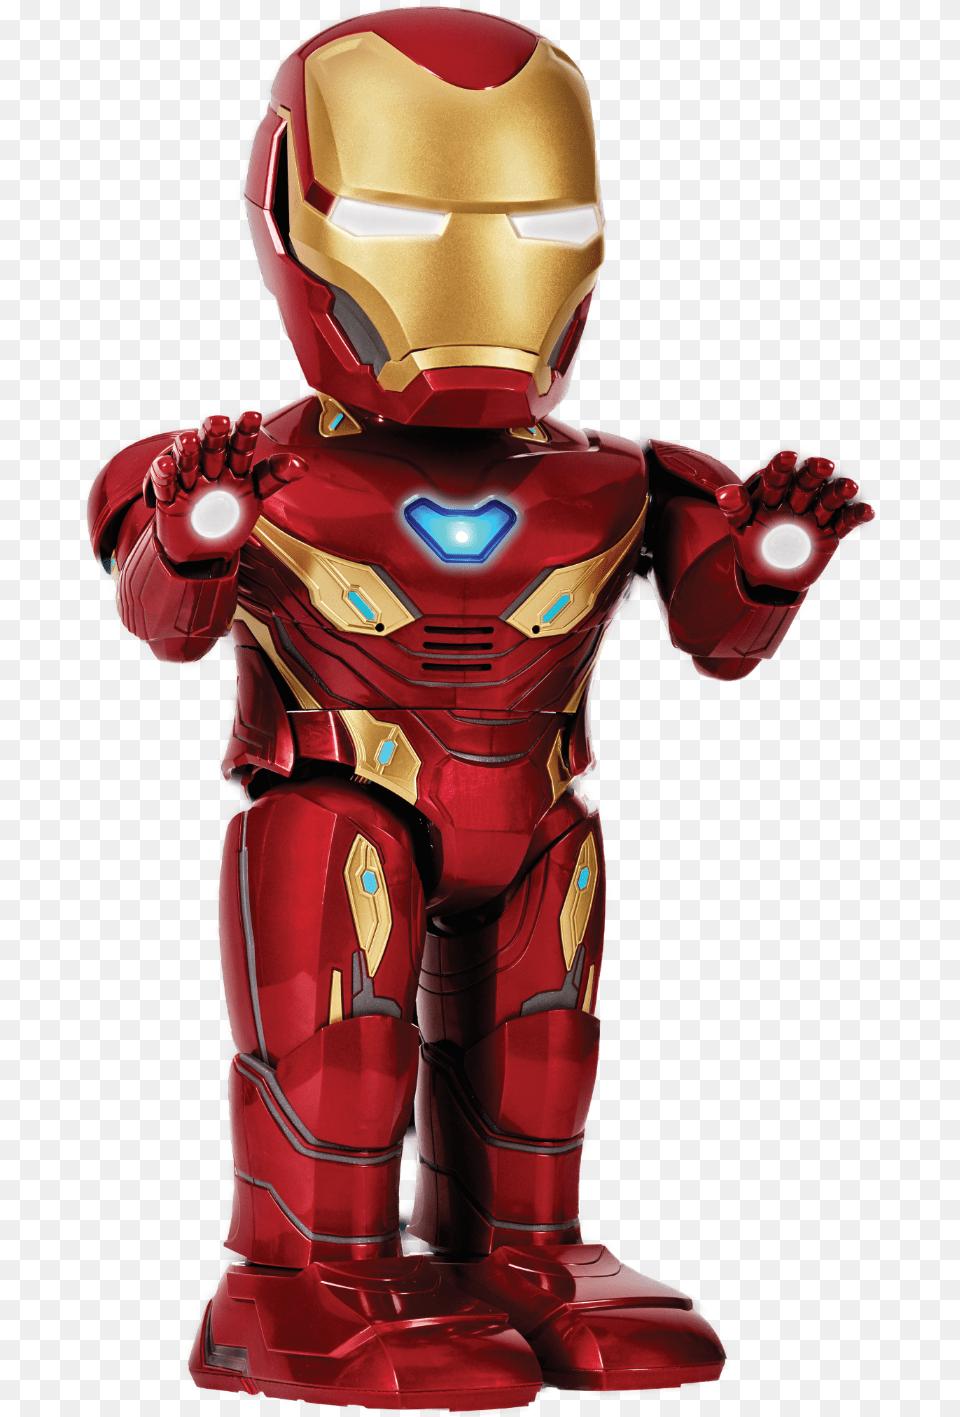 Using The Advanced App To Record A Video Of Yourself Ubtech Iron Man Mk50 Robot, Toy, Helmet Png